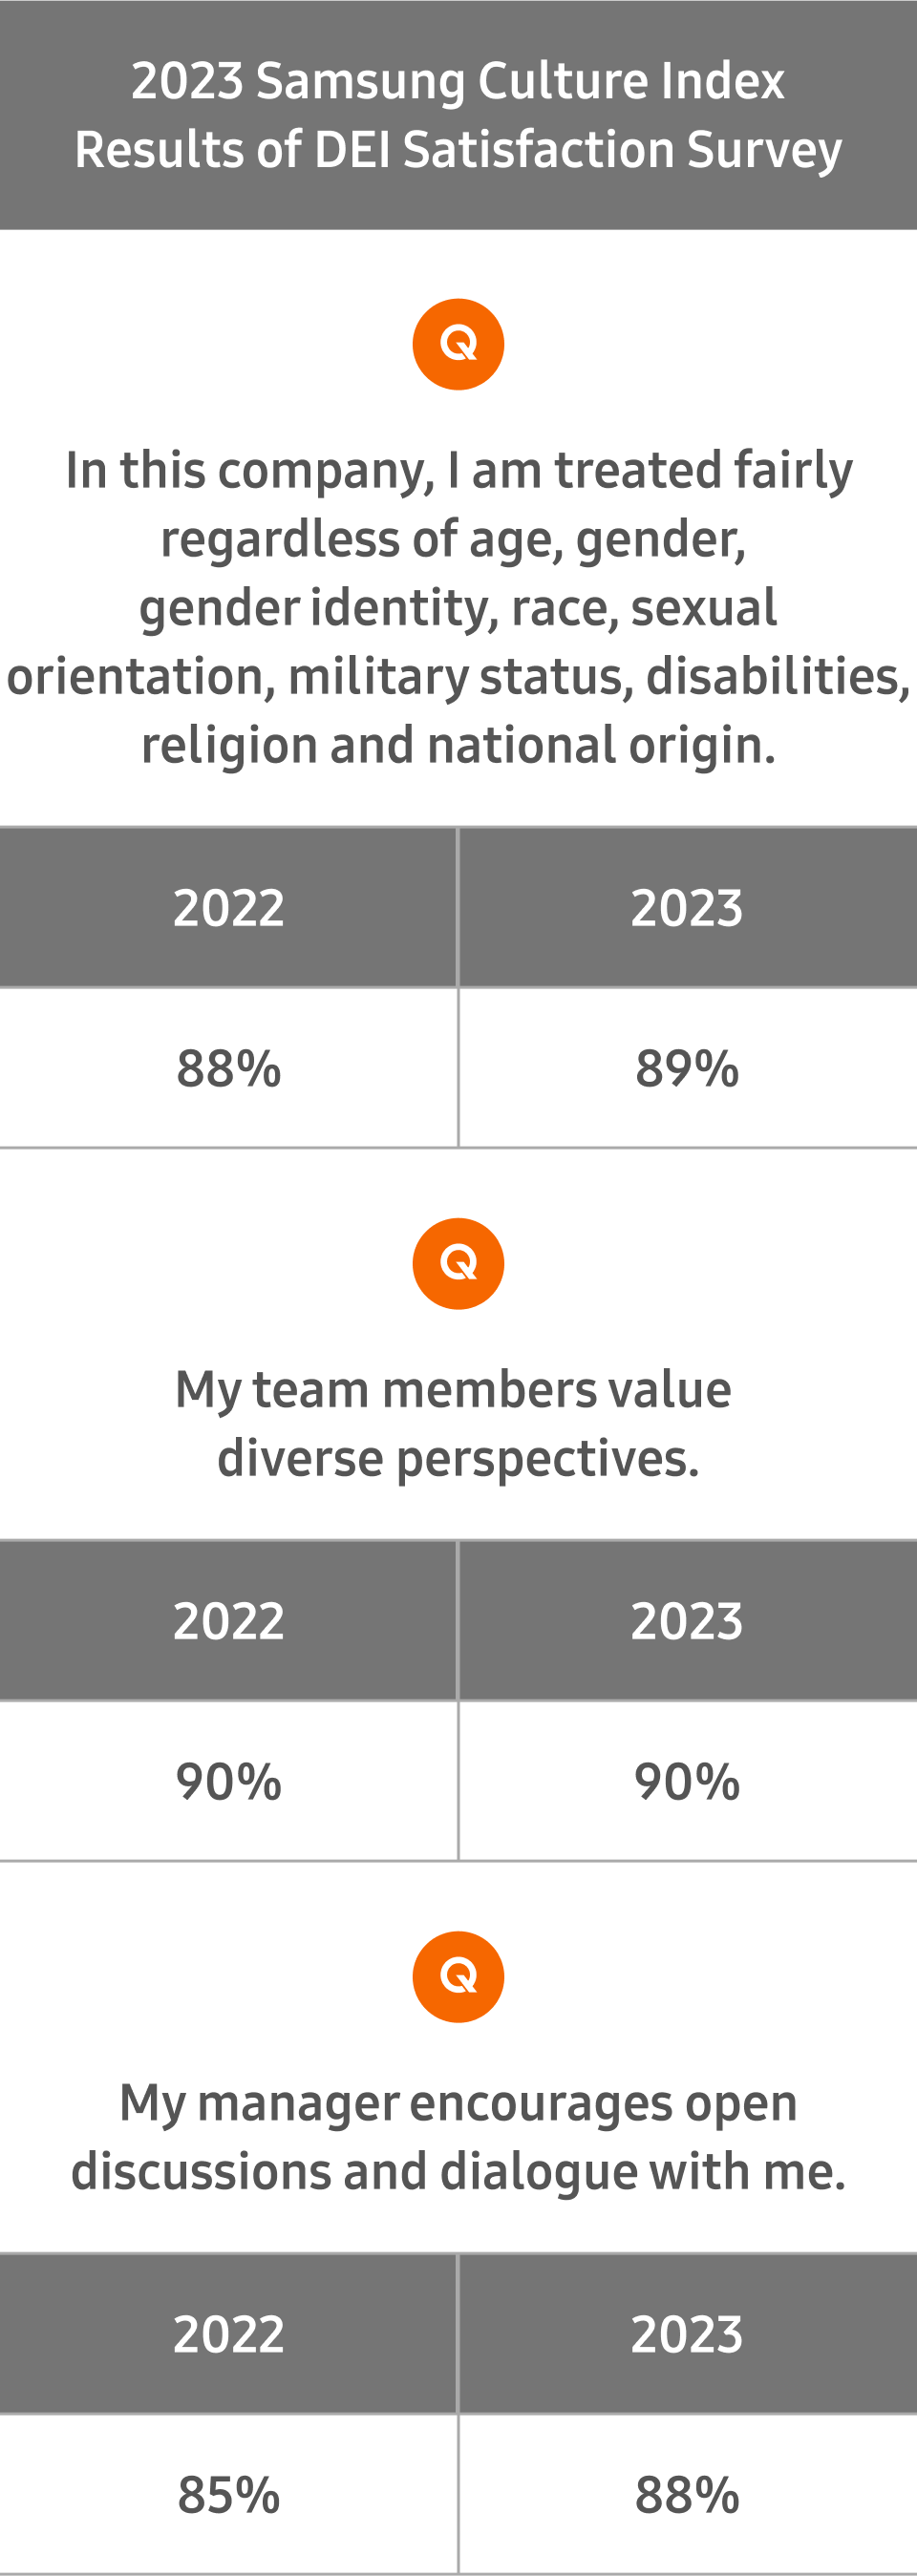 2023 Samsung Culture Index Results of DEI Satisfaction Survey Q  :In this Company, I am treated fairly regardless of age, gender, gender identity, race, sexual orientation, military status, disabilities, religion and national origin. - 2022 88%, 2023 89% / Q : My team members value diverse perspectives. - 2022 90%, 2023 90% / Q : My manager encourages open discussions and dialogue with me. - 2022 85%, 2023 88%